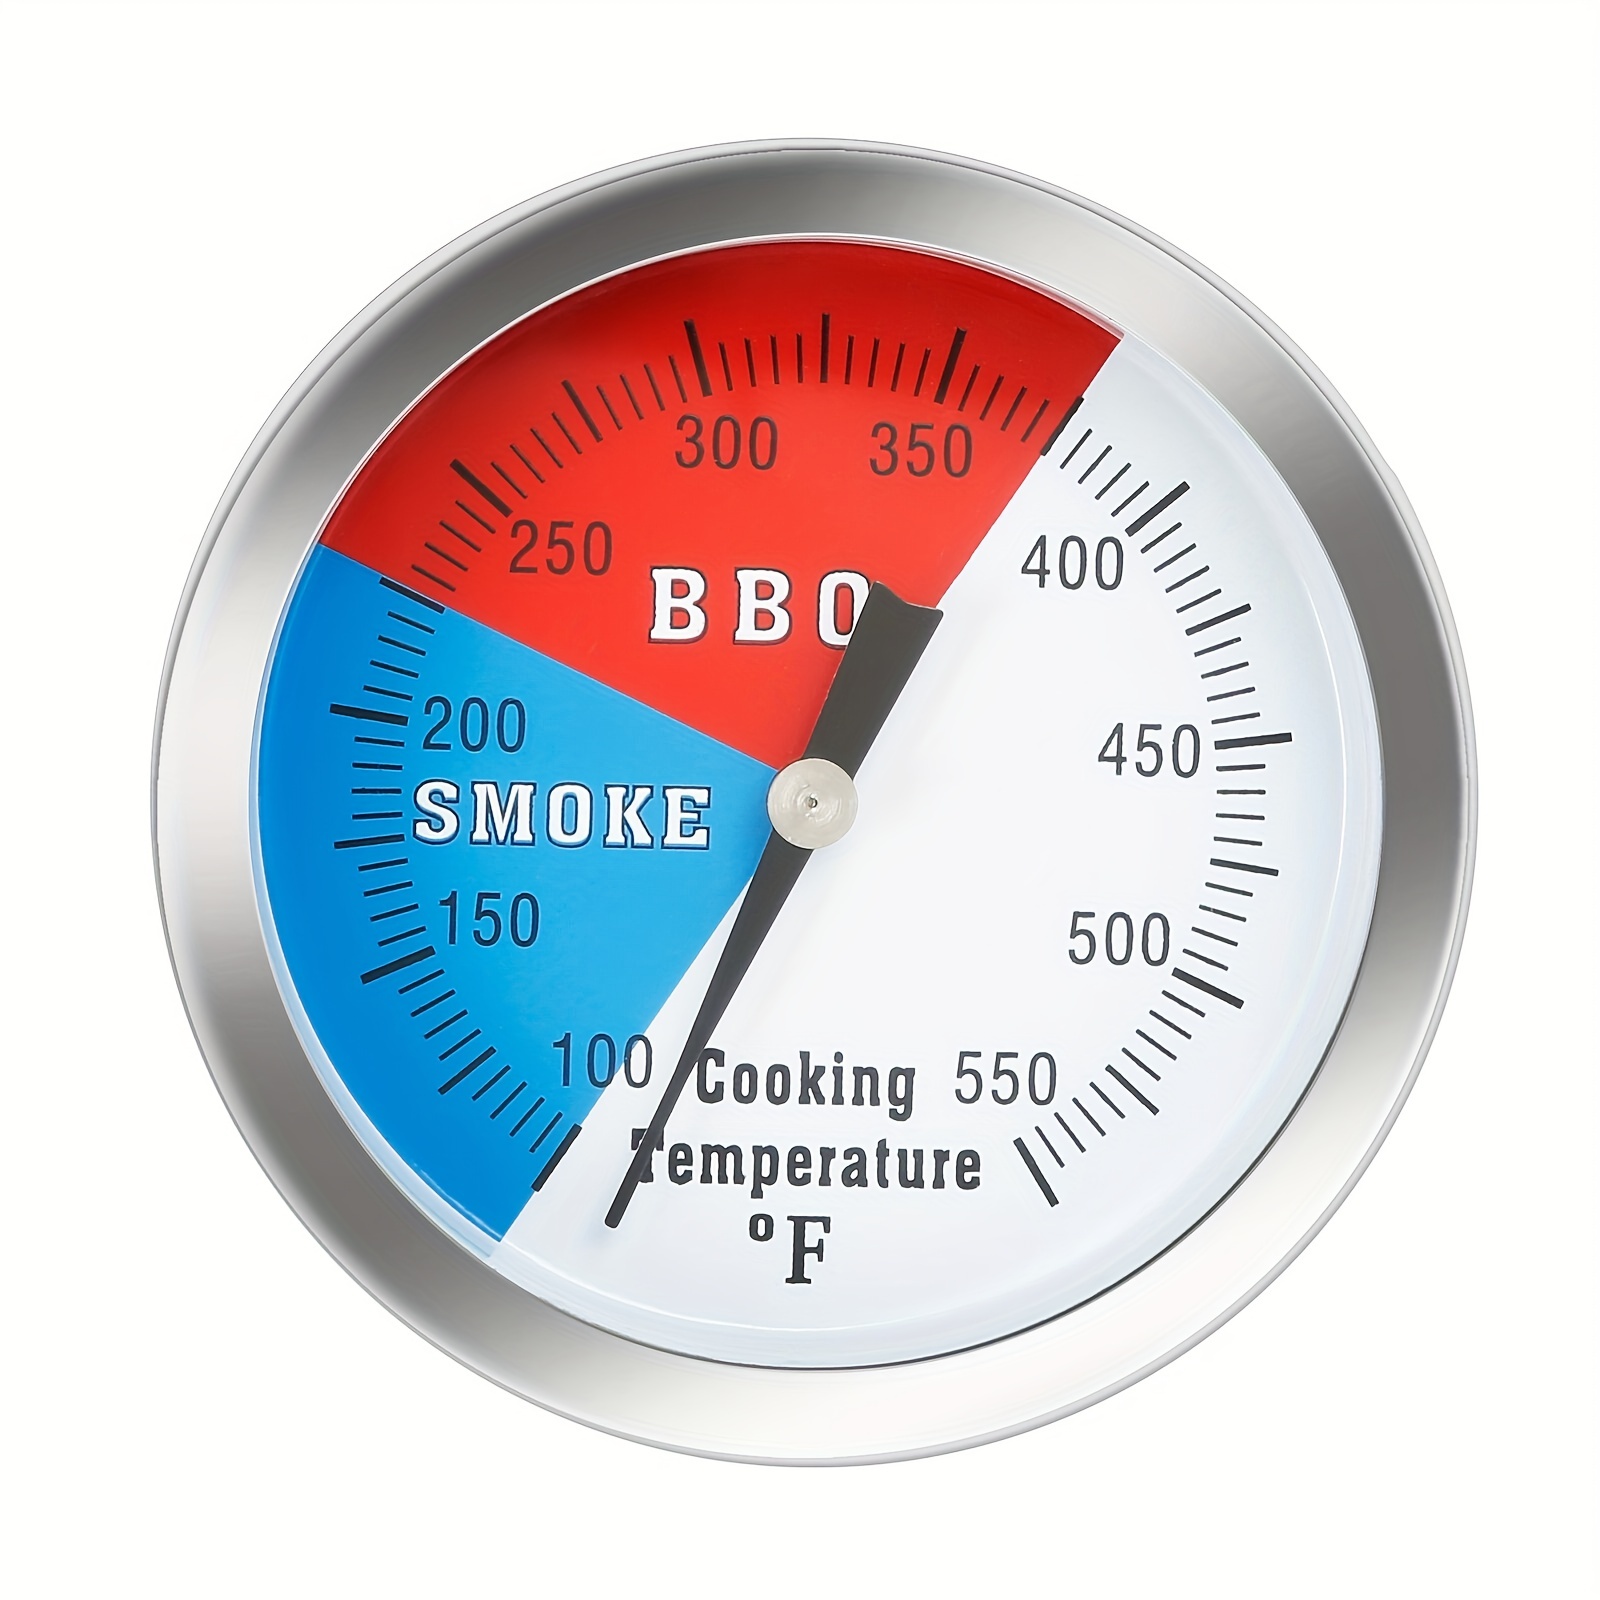 2 inch BBQ Thermometer Gauge Charcoal Grill Pit Smoker Temp Gauge Grill Thermometer Replacement for Smoker Grill Wood Charcoal Pit, Heat Indicator